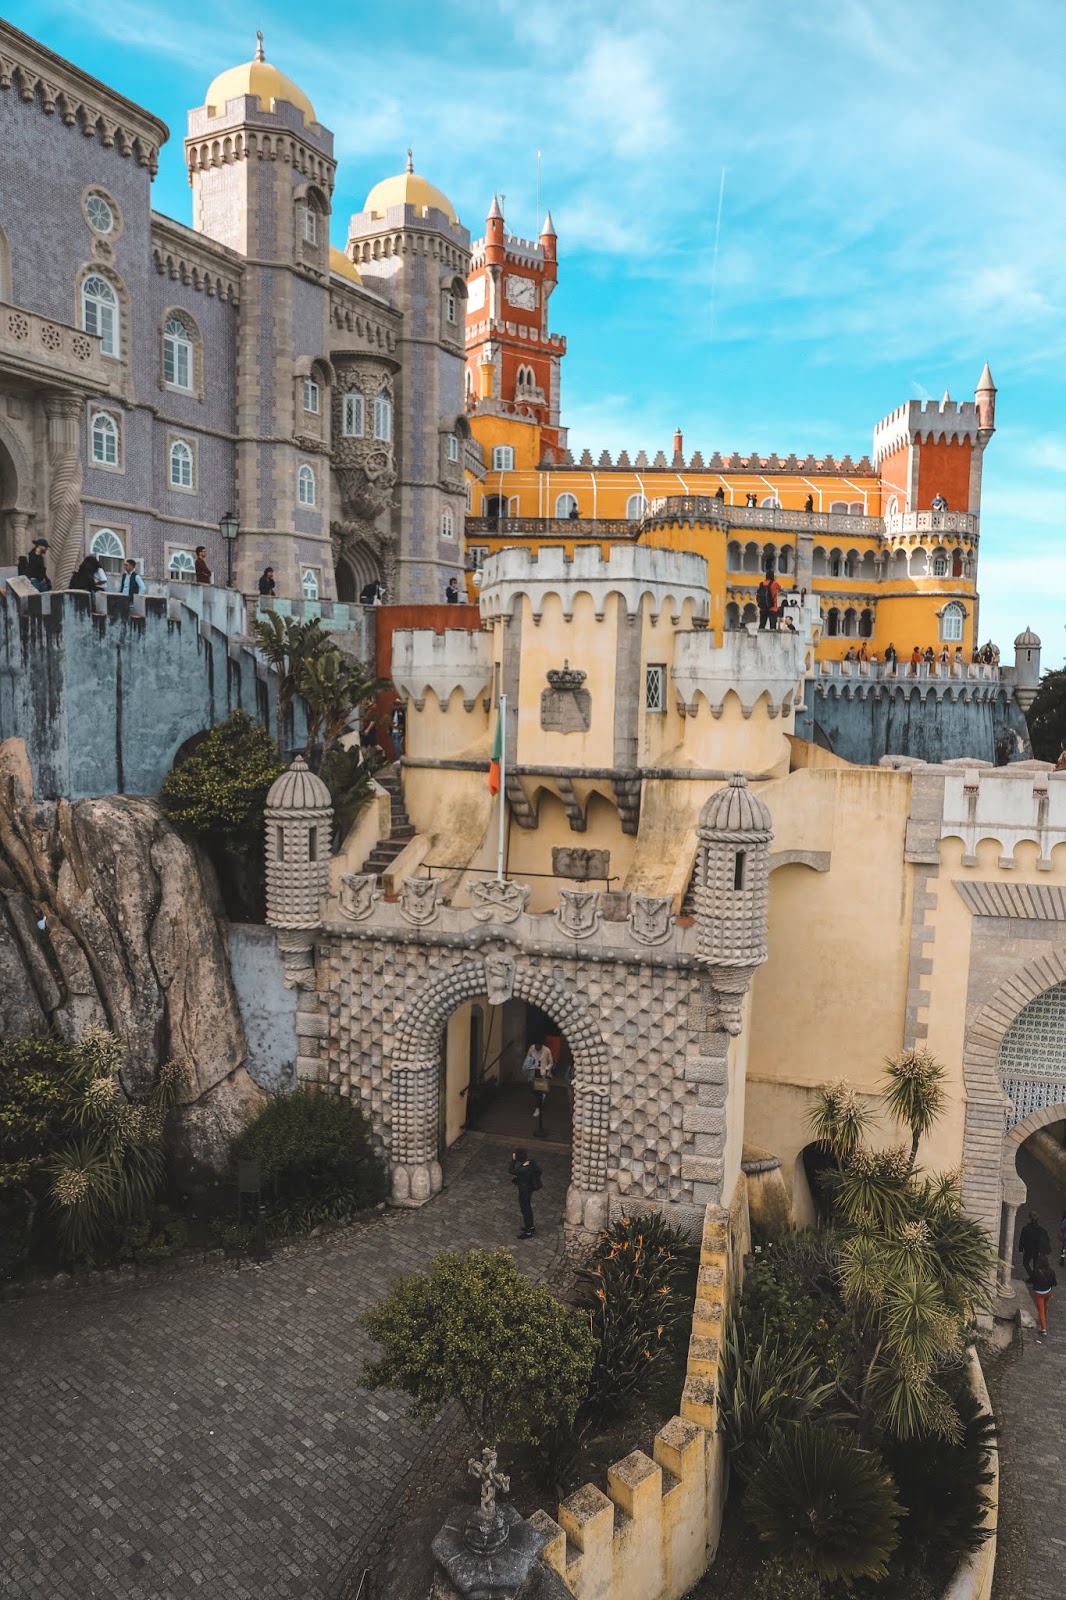 Pena Palace in Sintra, Portugal | Travel Guide